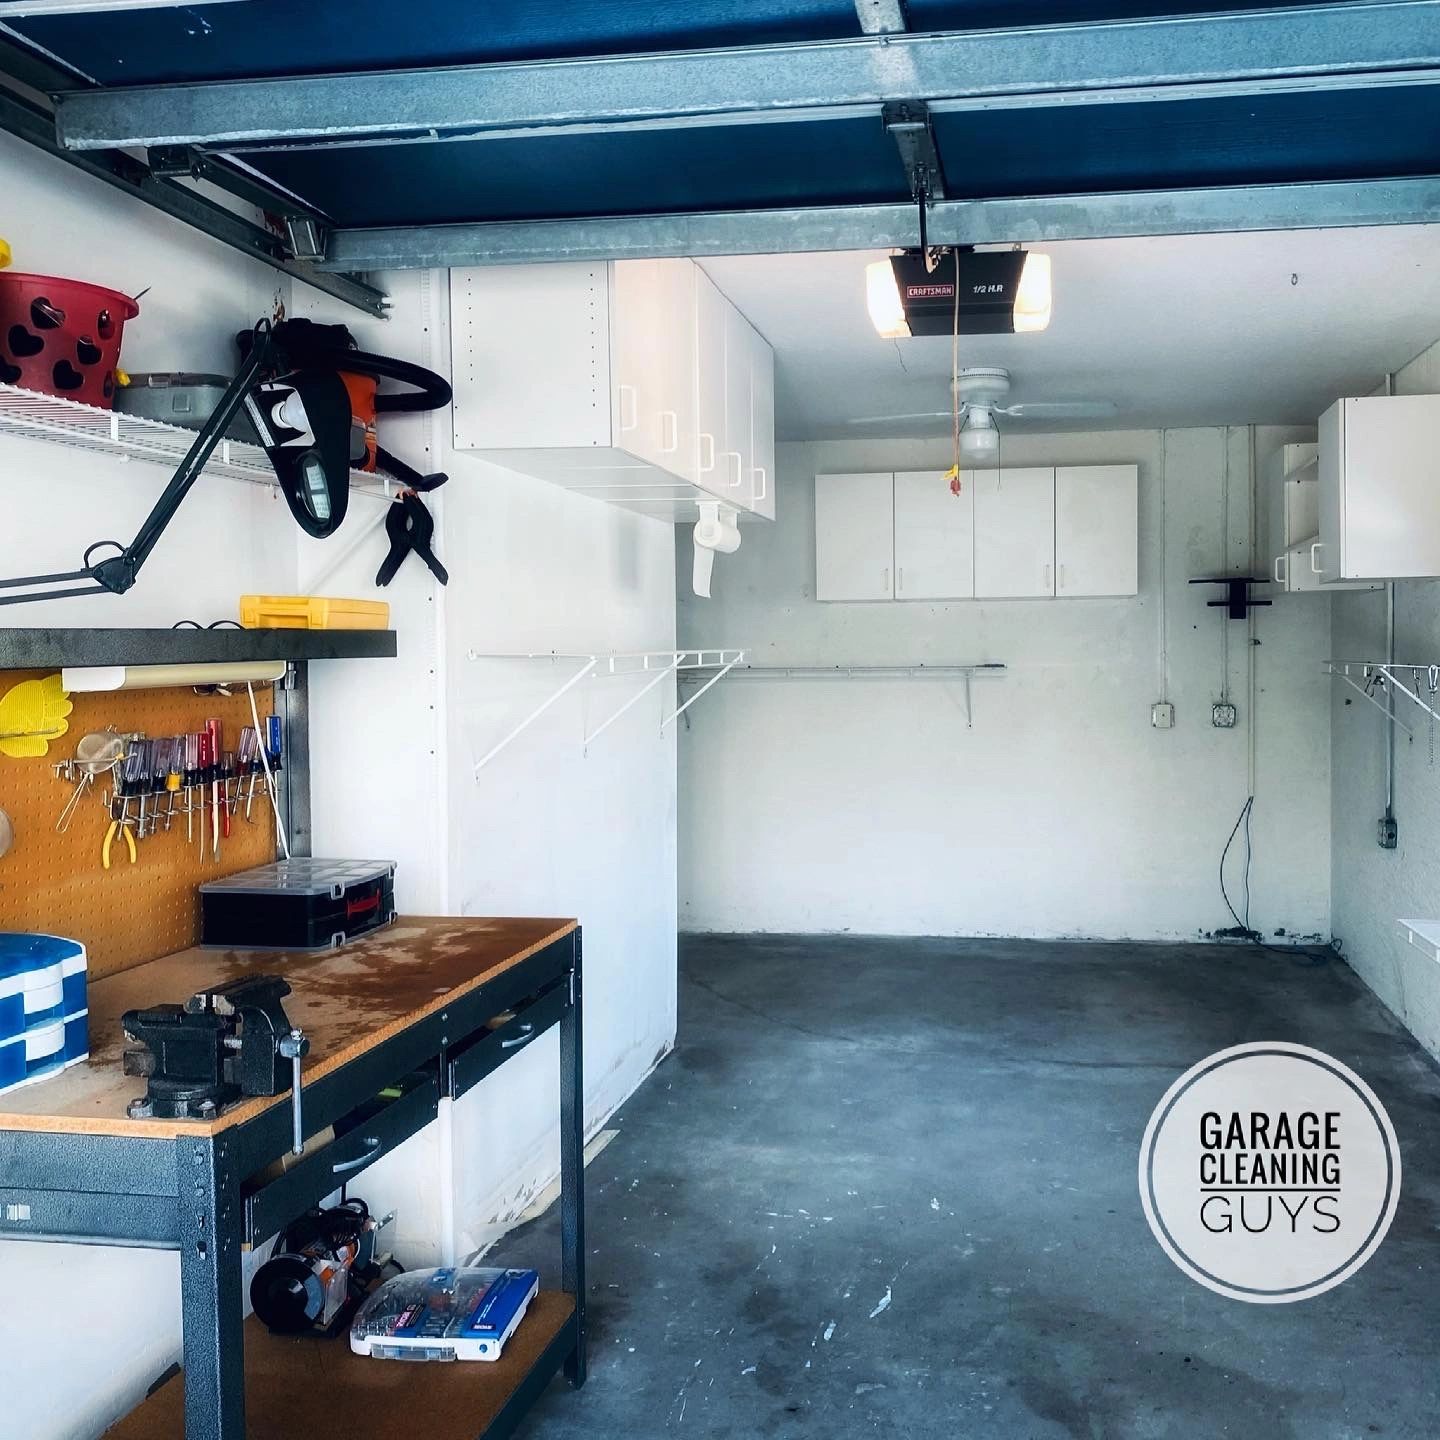 Removed all junk and decluttered garage